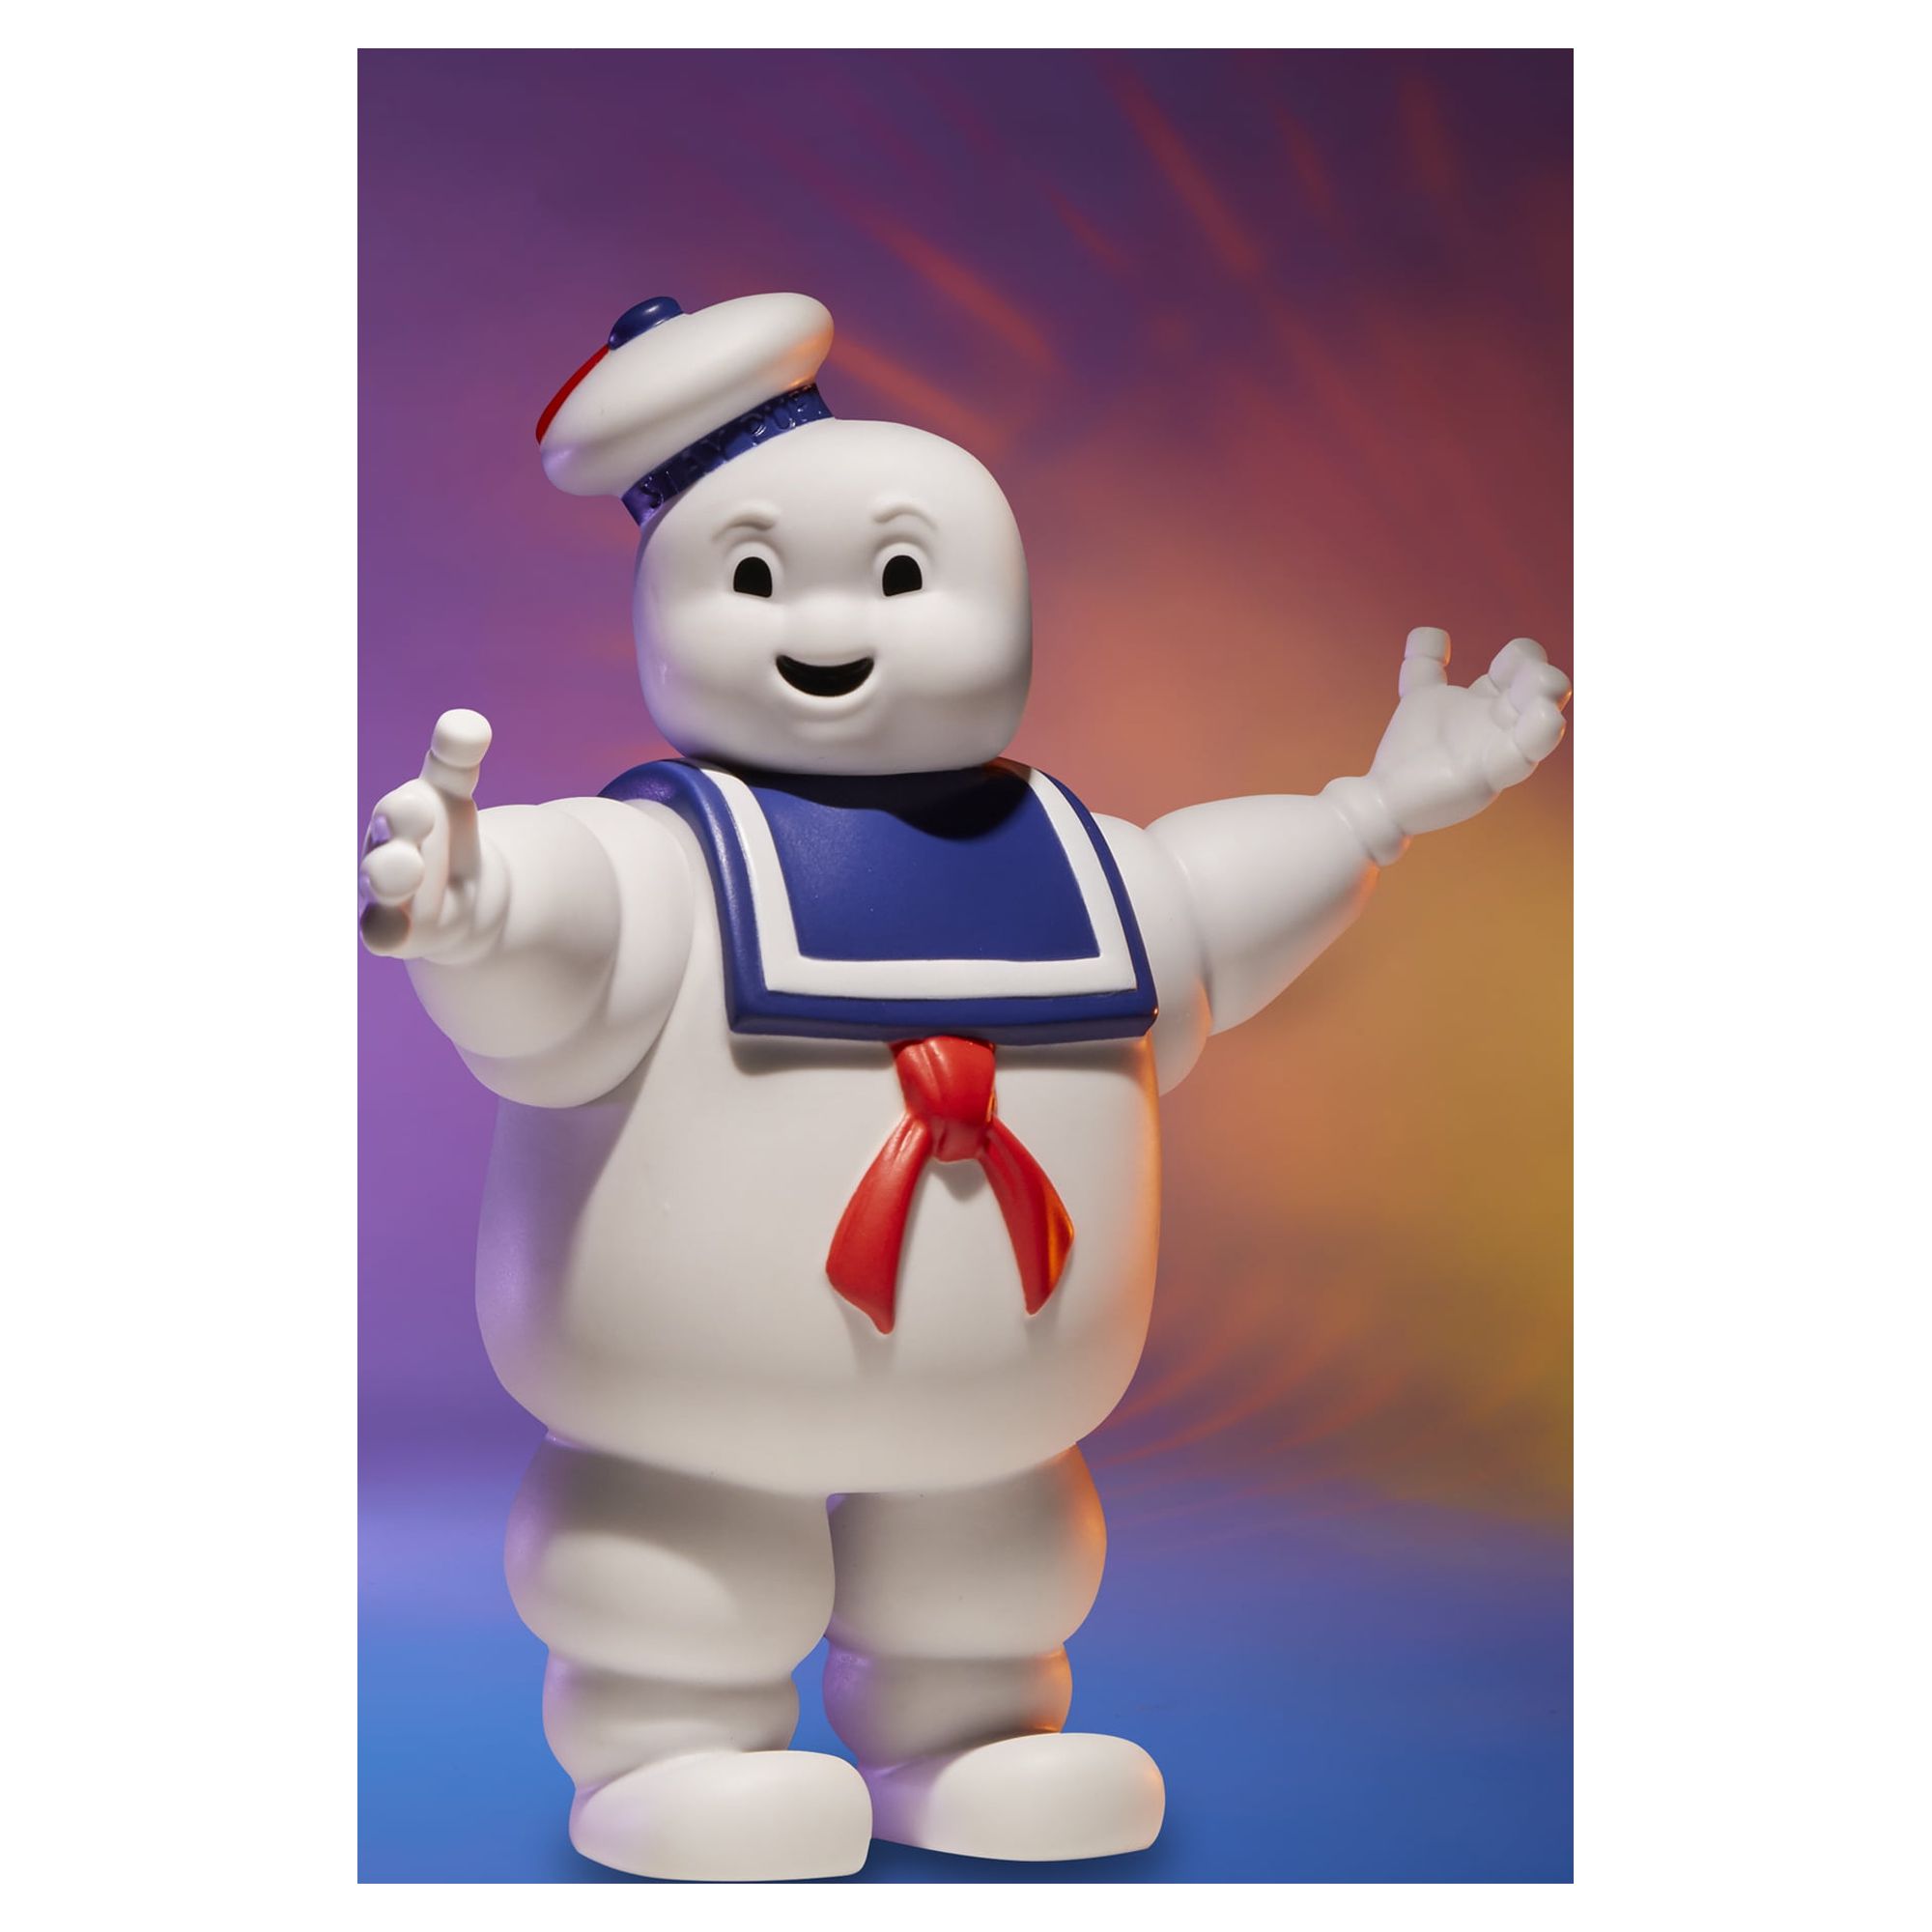 Ghostbusters Kenner Classics Stay-Puft Marshmallow Man - image 3 of 7